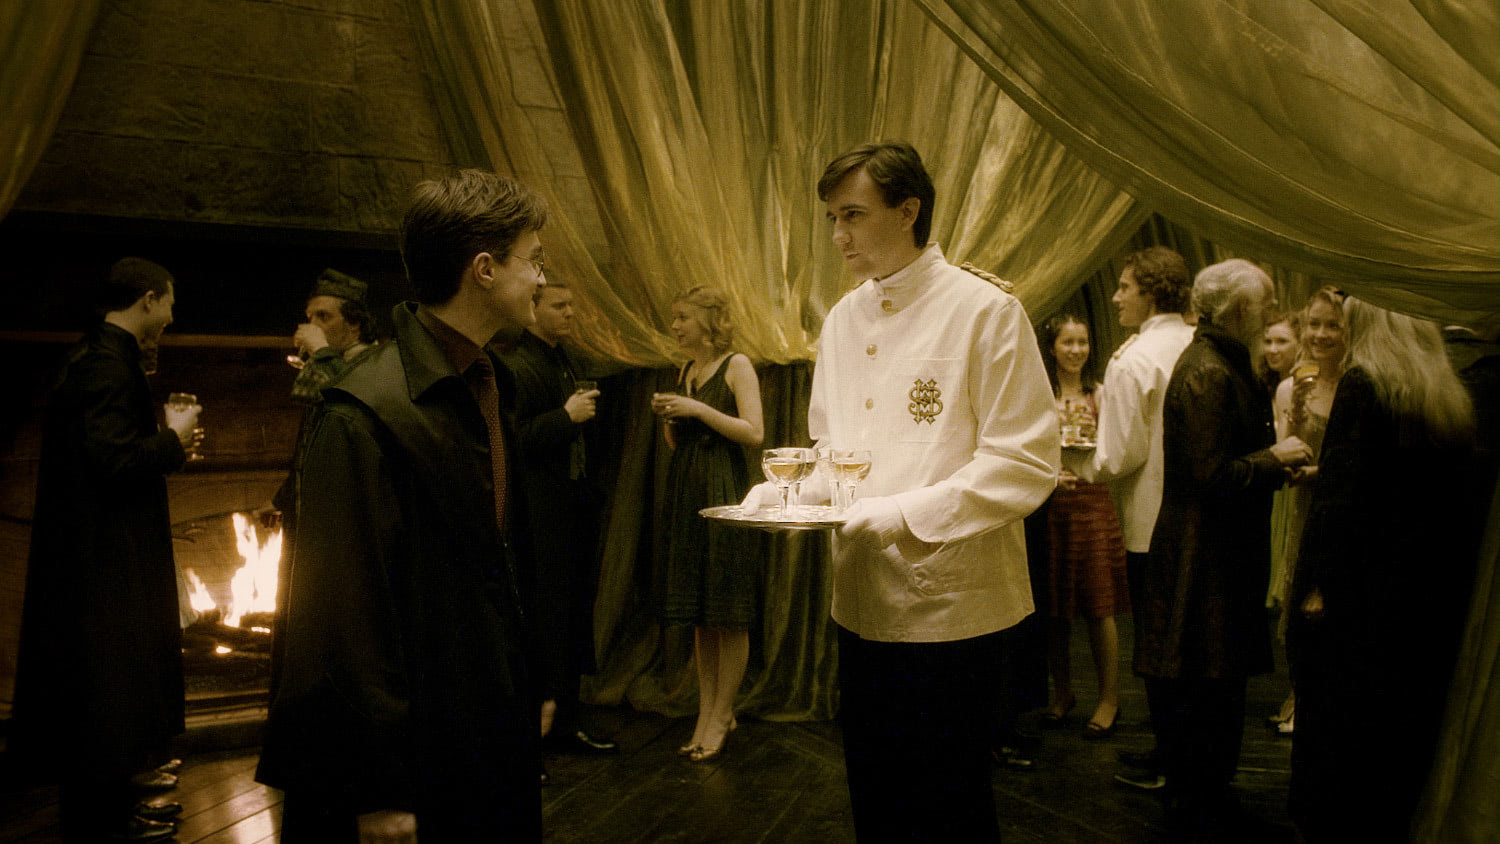 Harry and Neville at Slughorn’s Christmas party